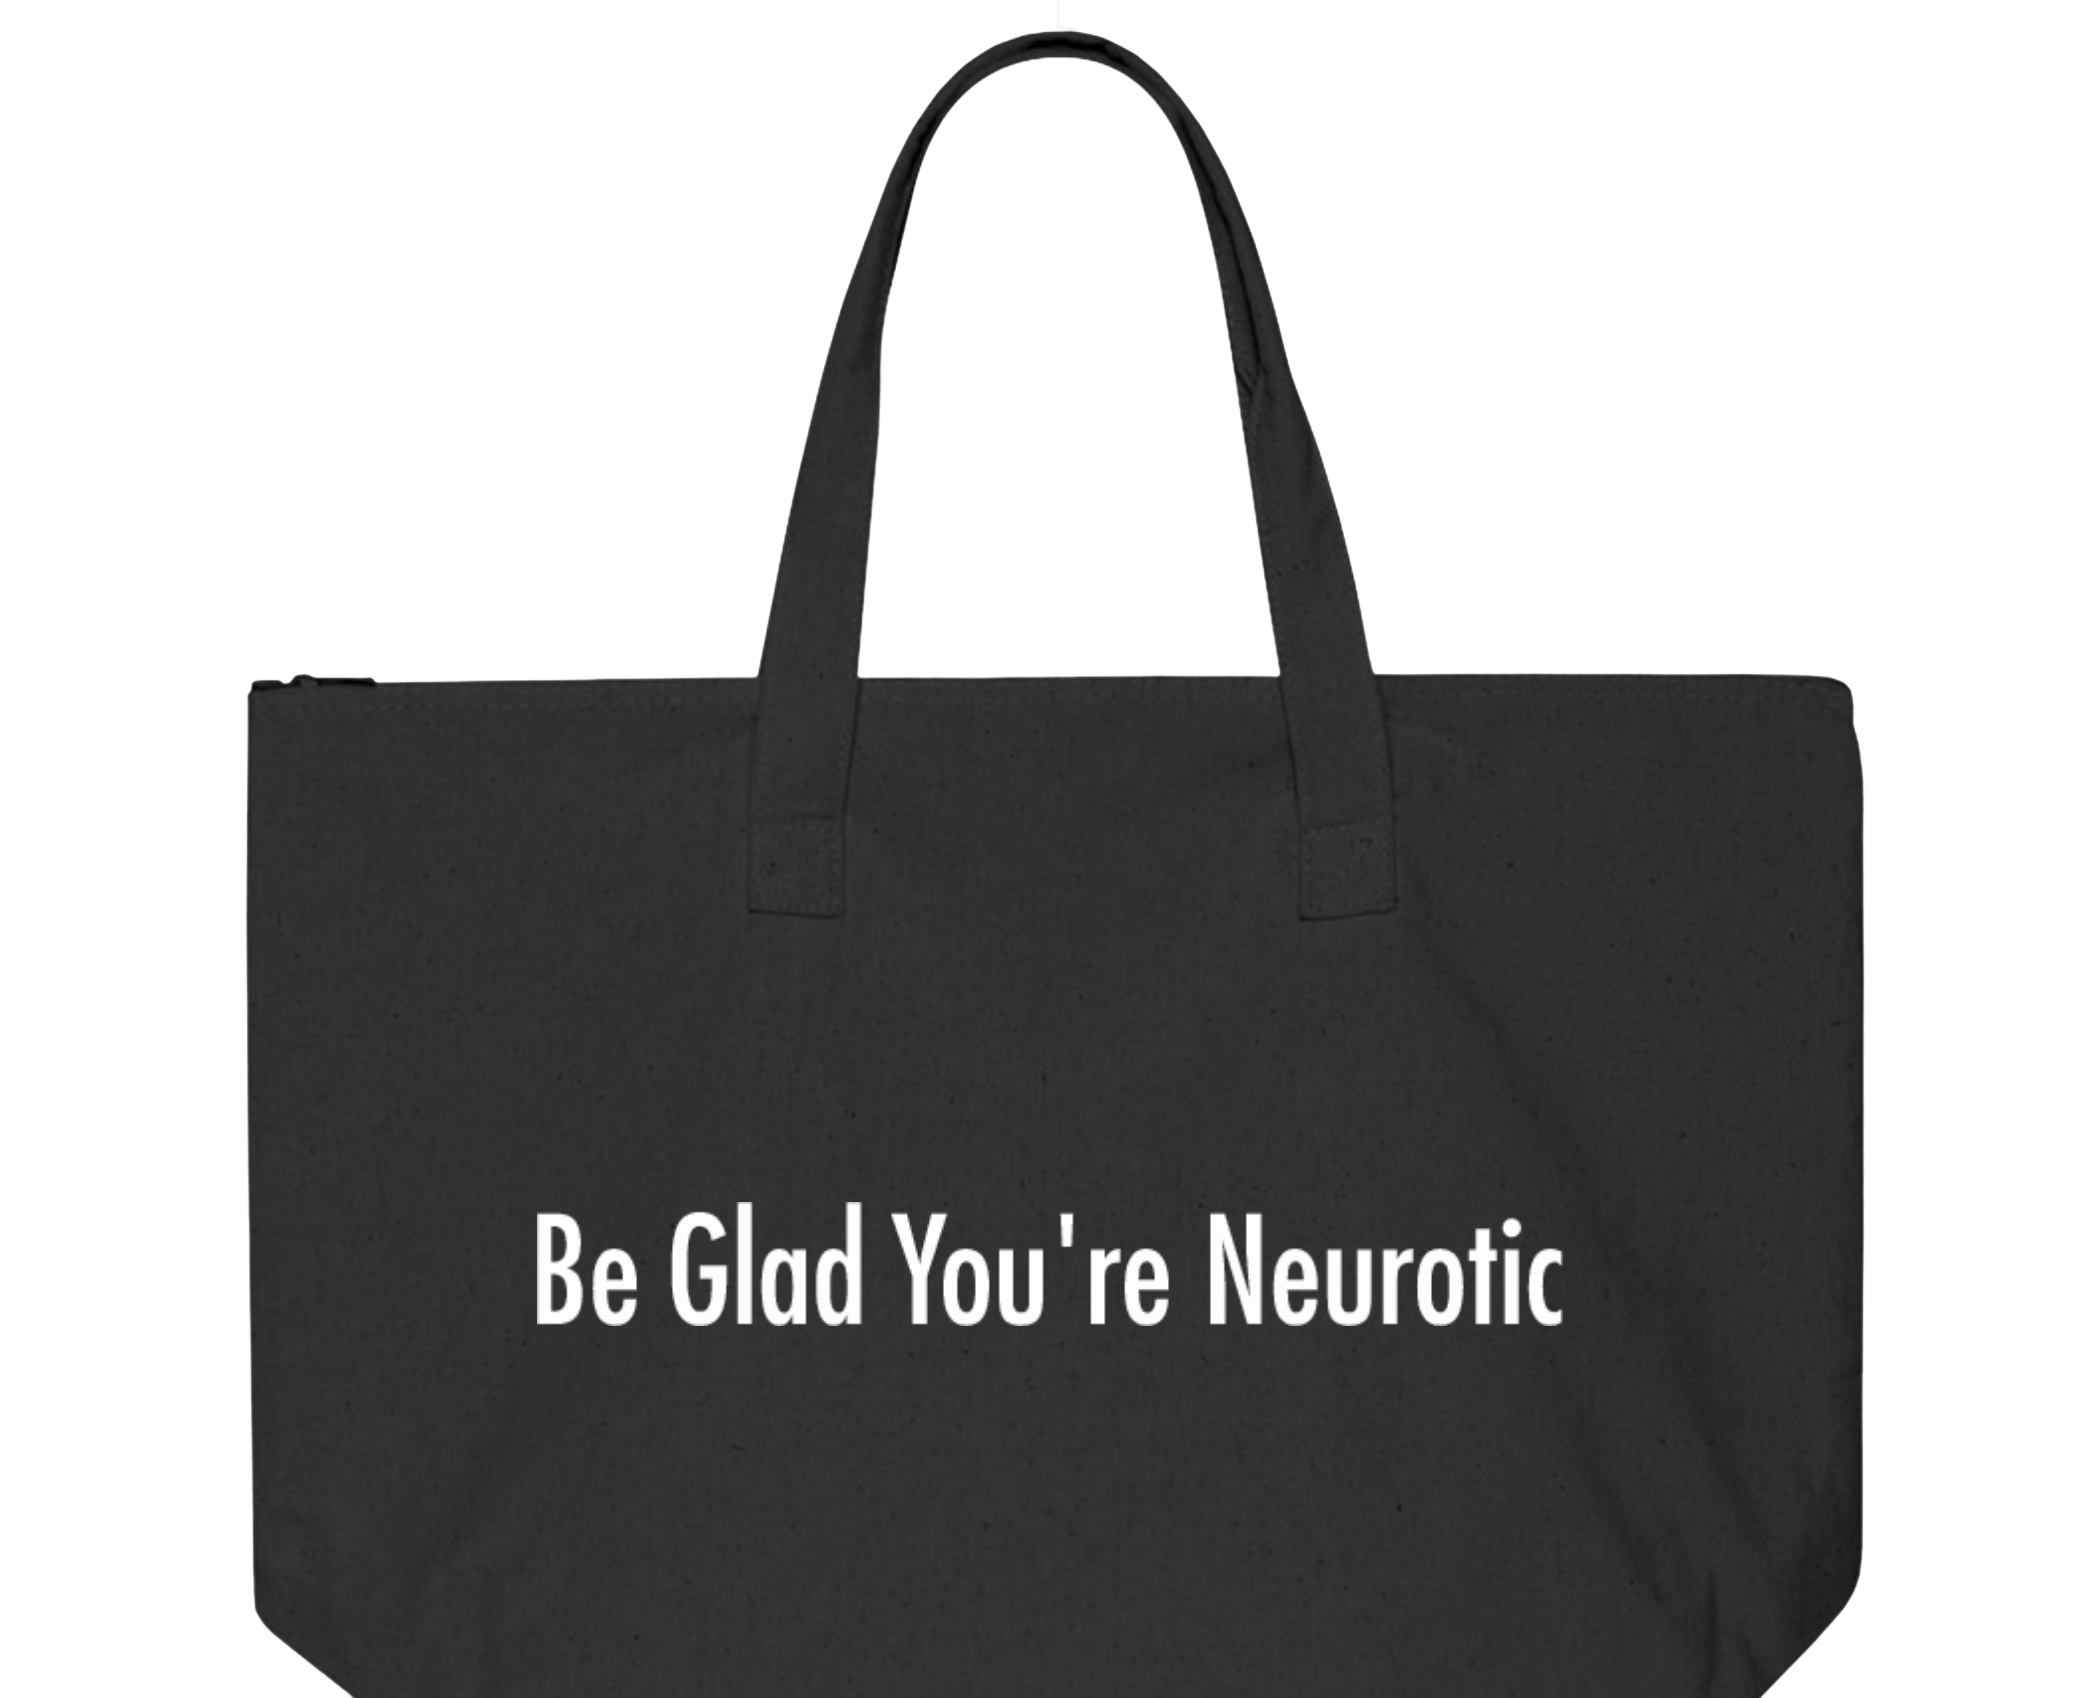 photography of a Neurotic bag